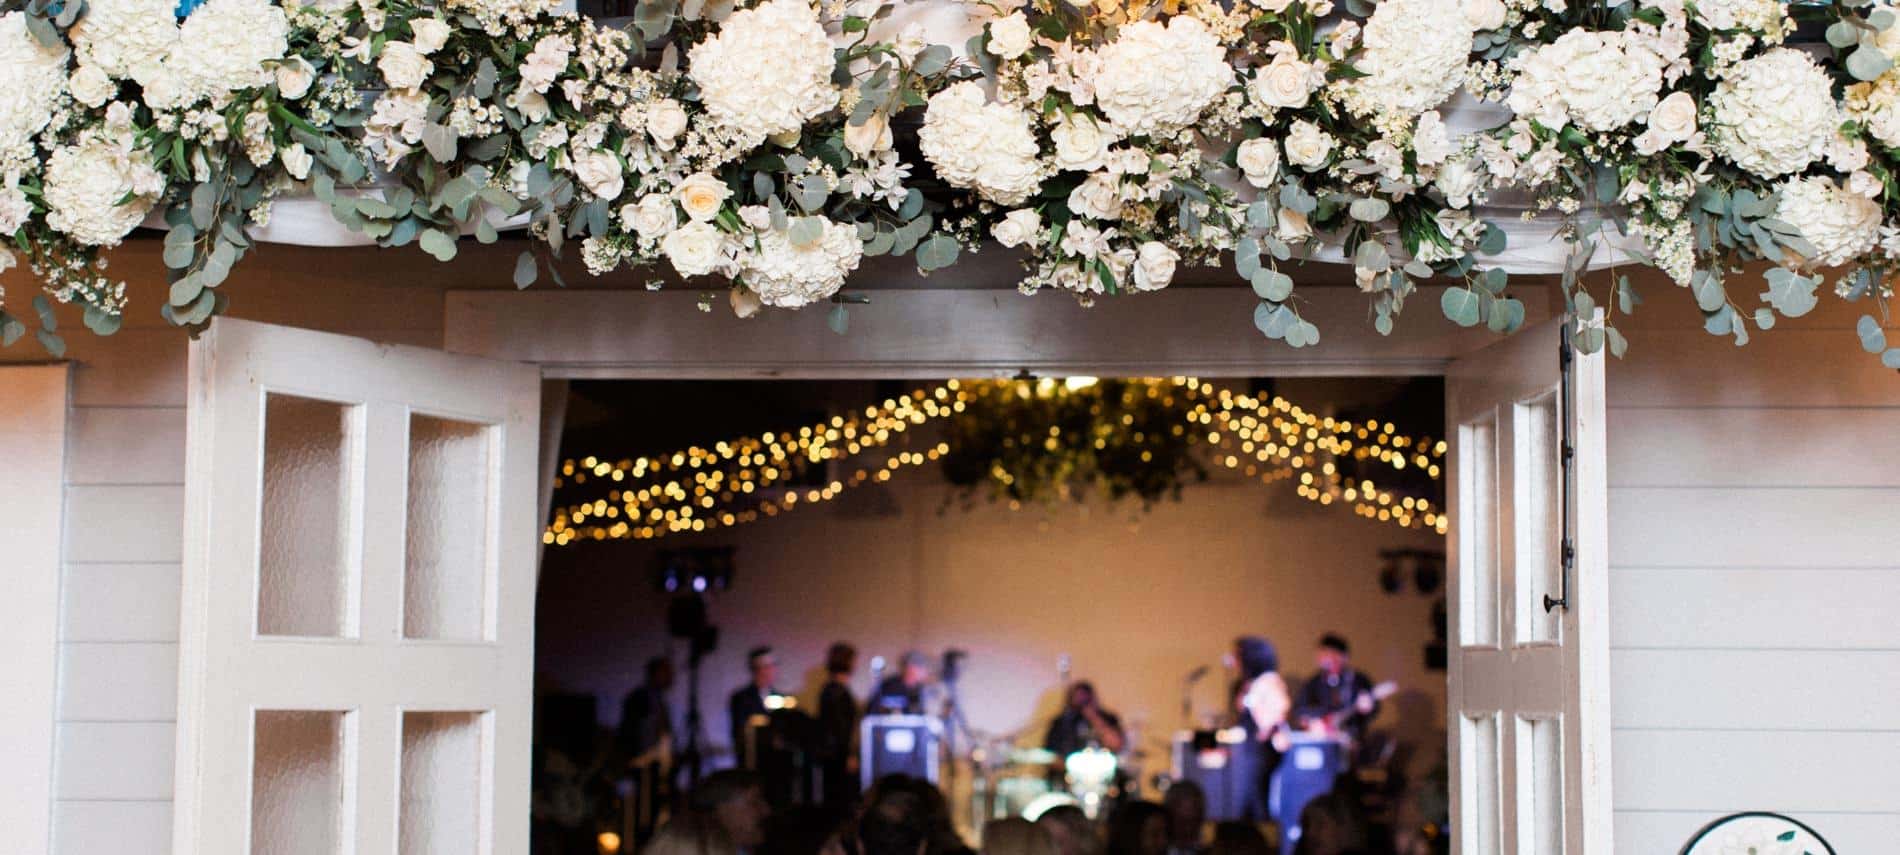 Double glass French doors swung open with large white flowers hanging overhead with view of wedding band and twinkle lights inside